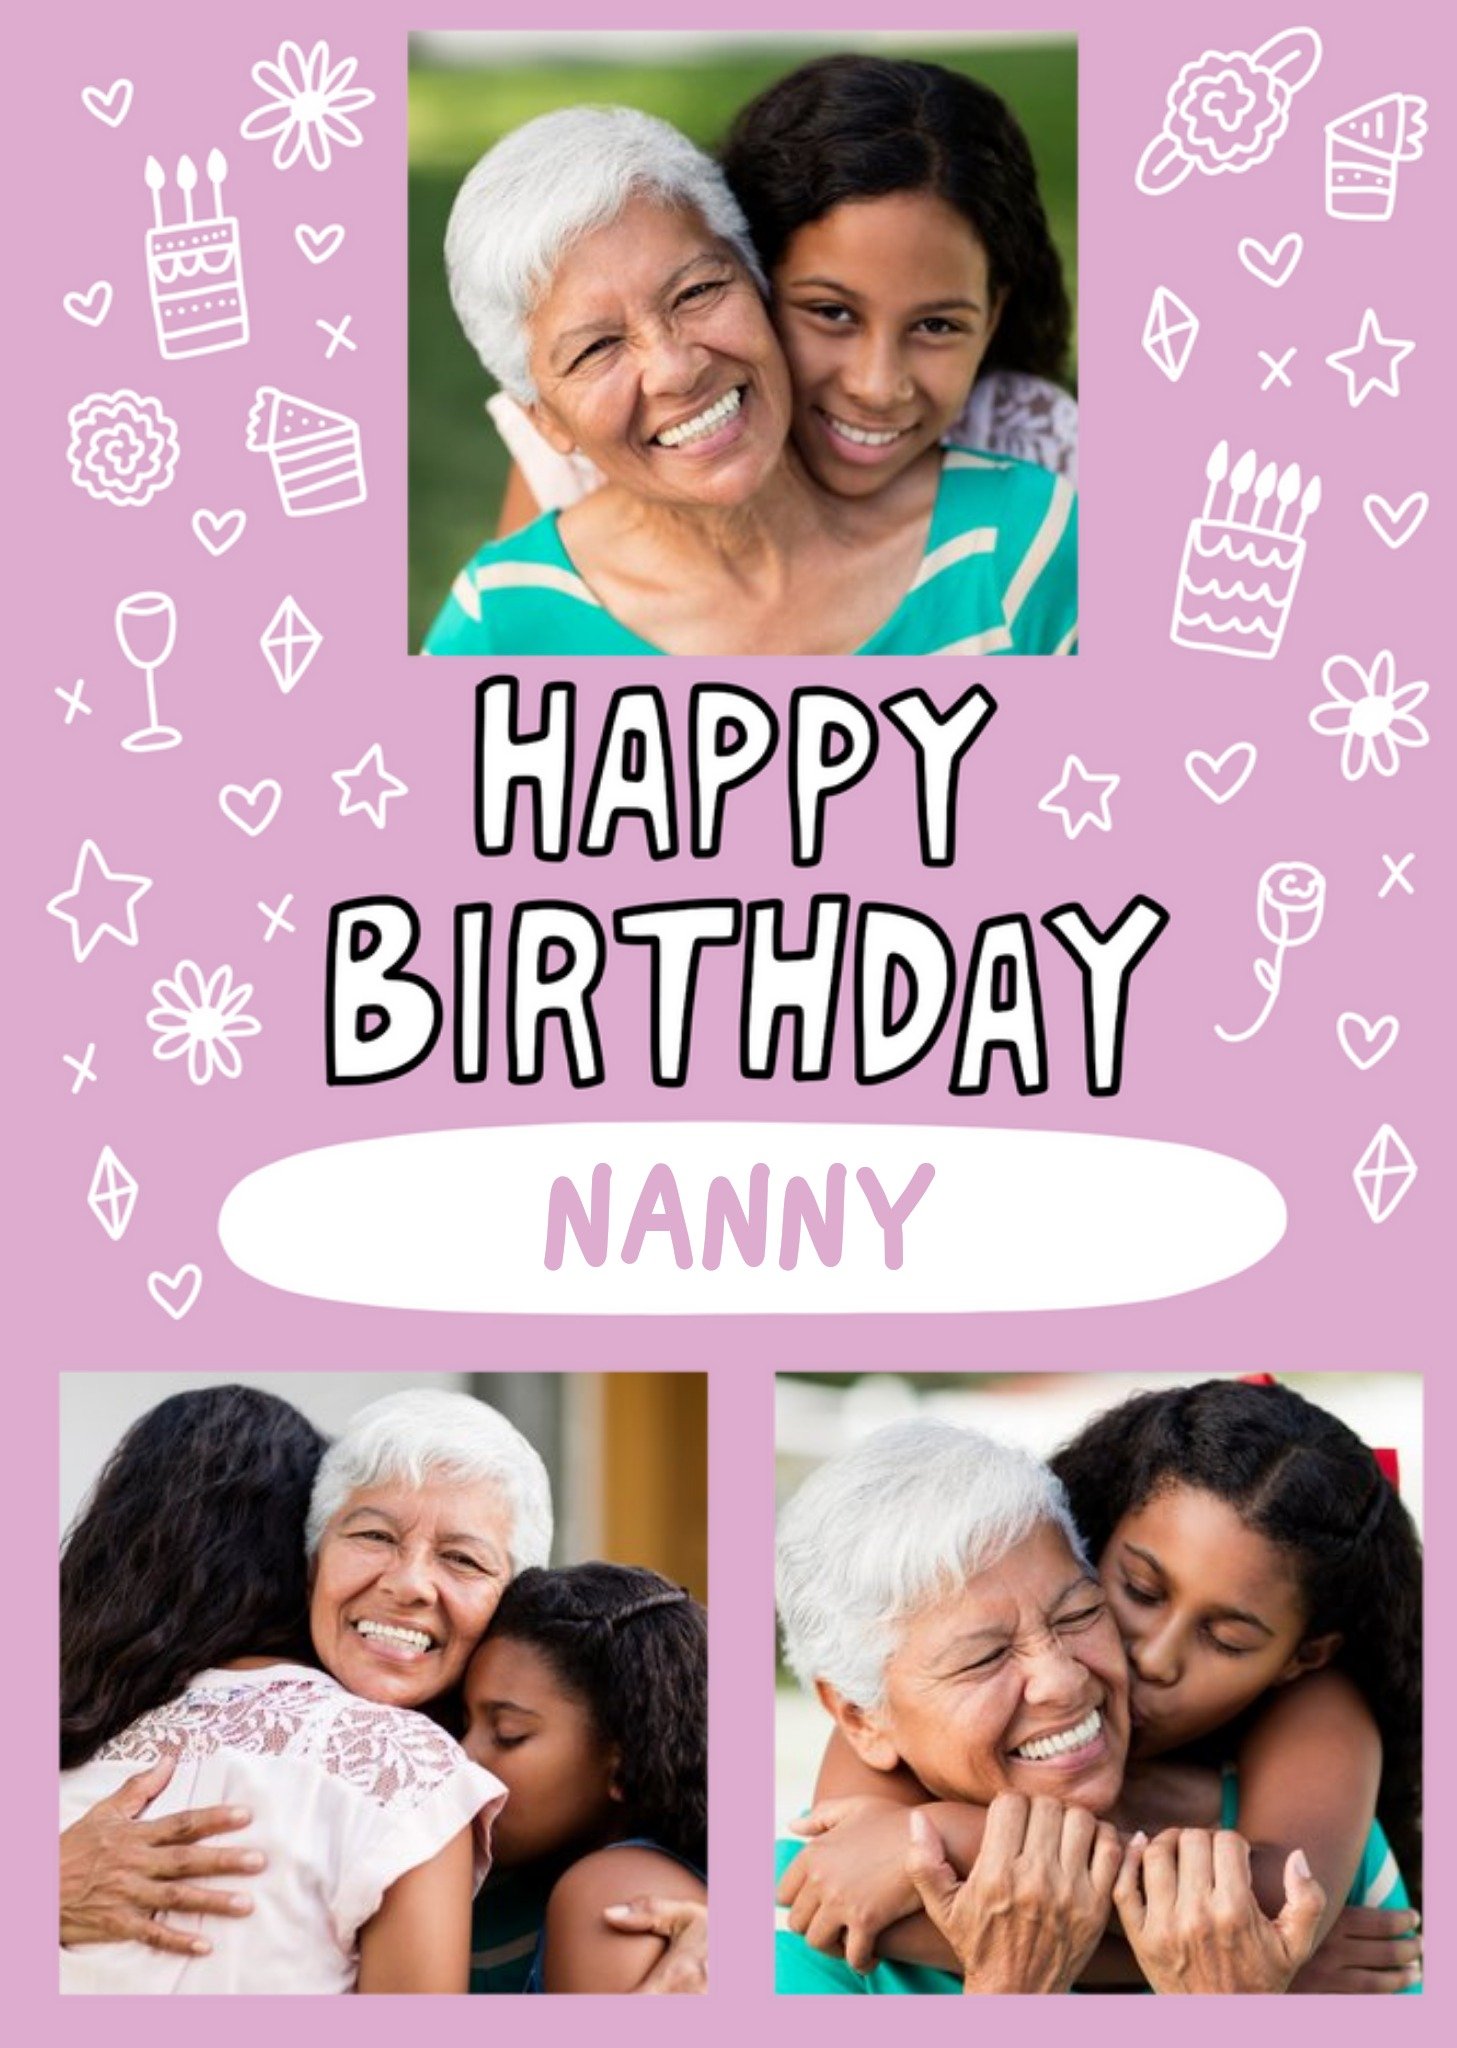 Moonpig Pink Background And Decorative Icons With Three Photos Upload Birthday Card, Large